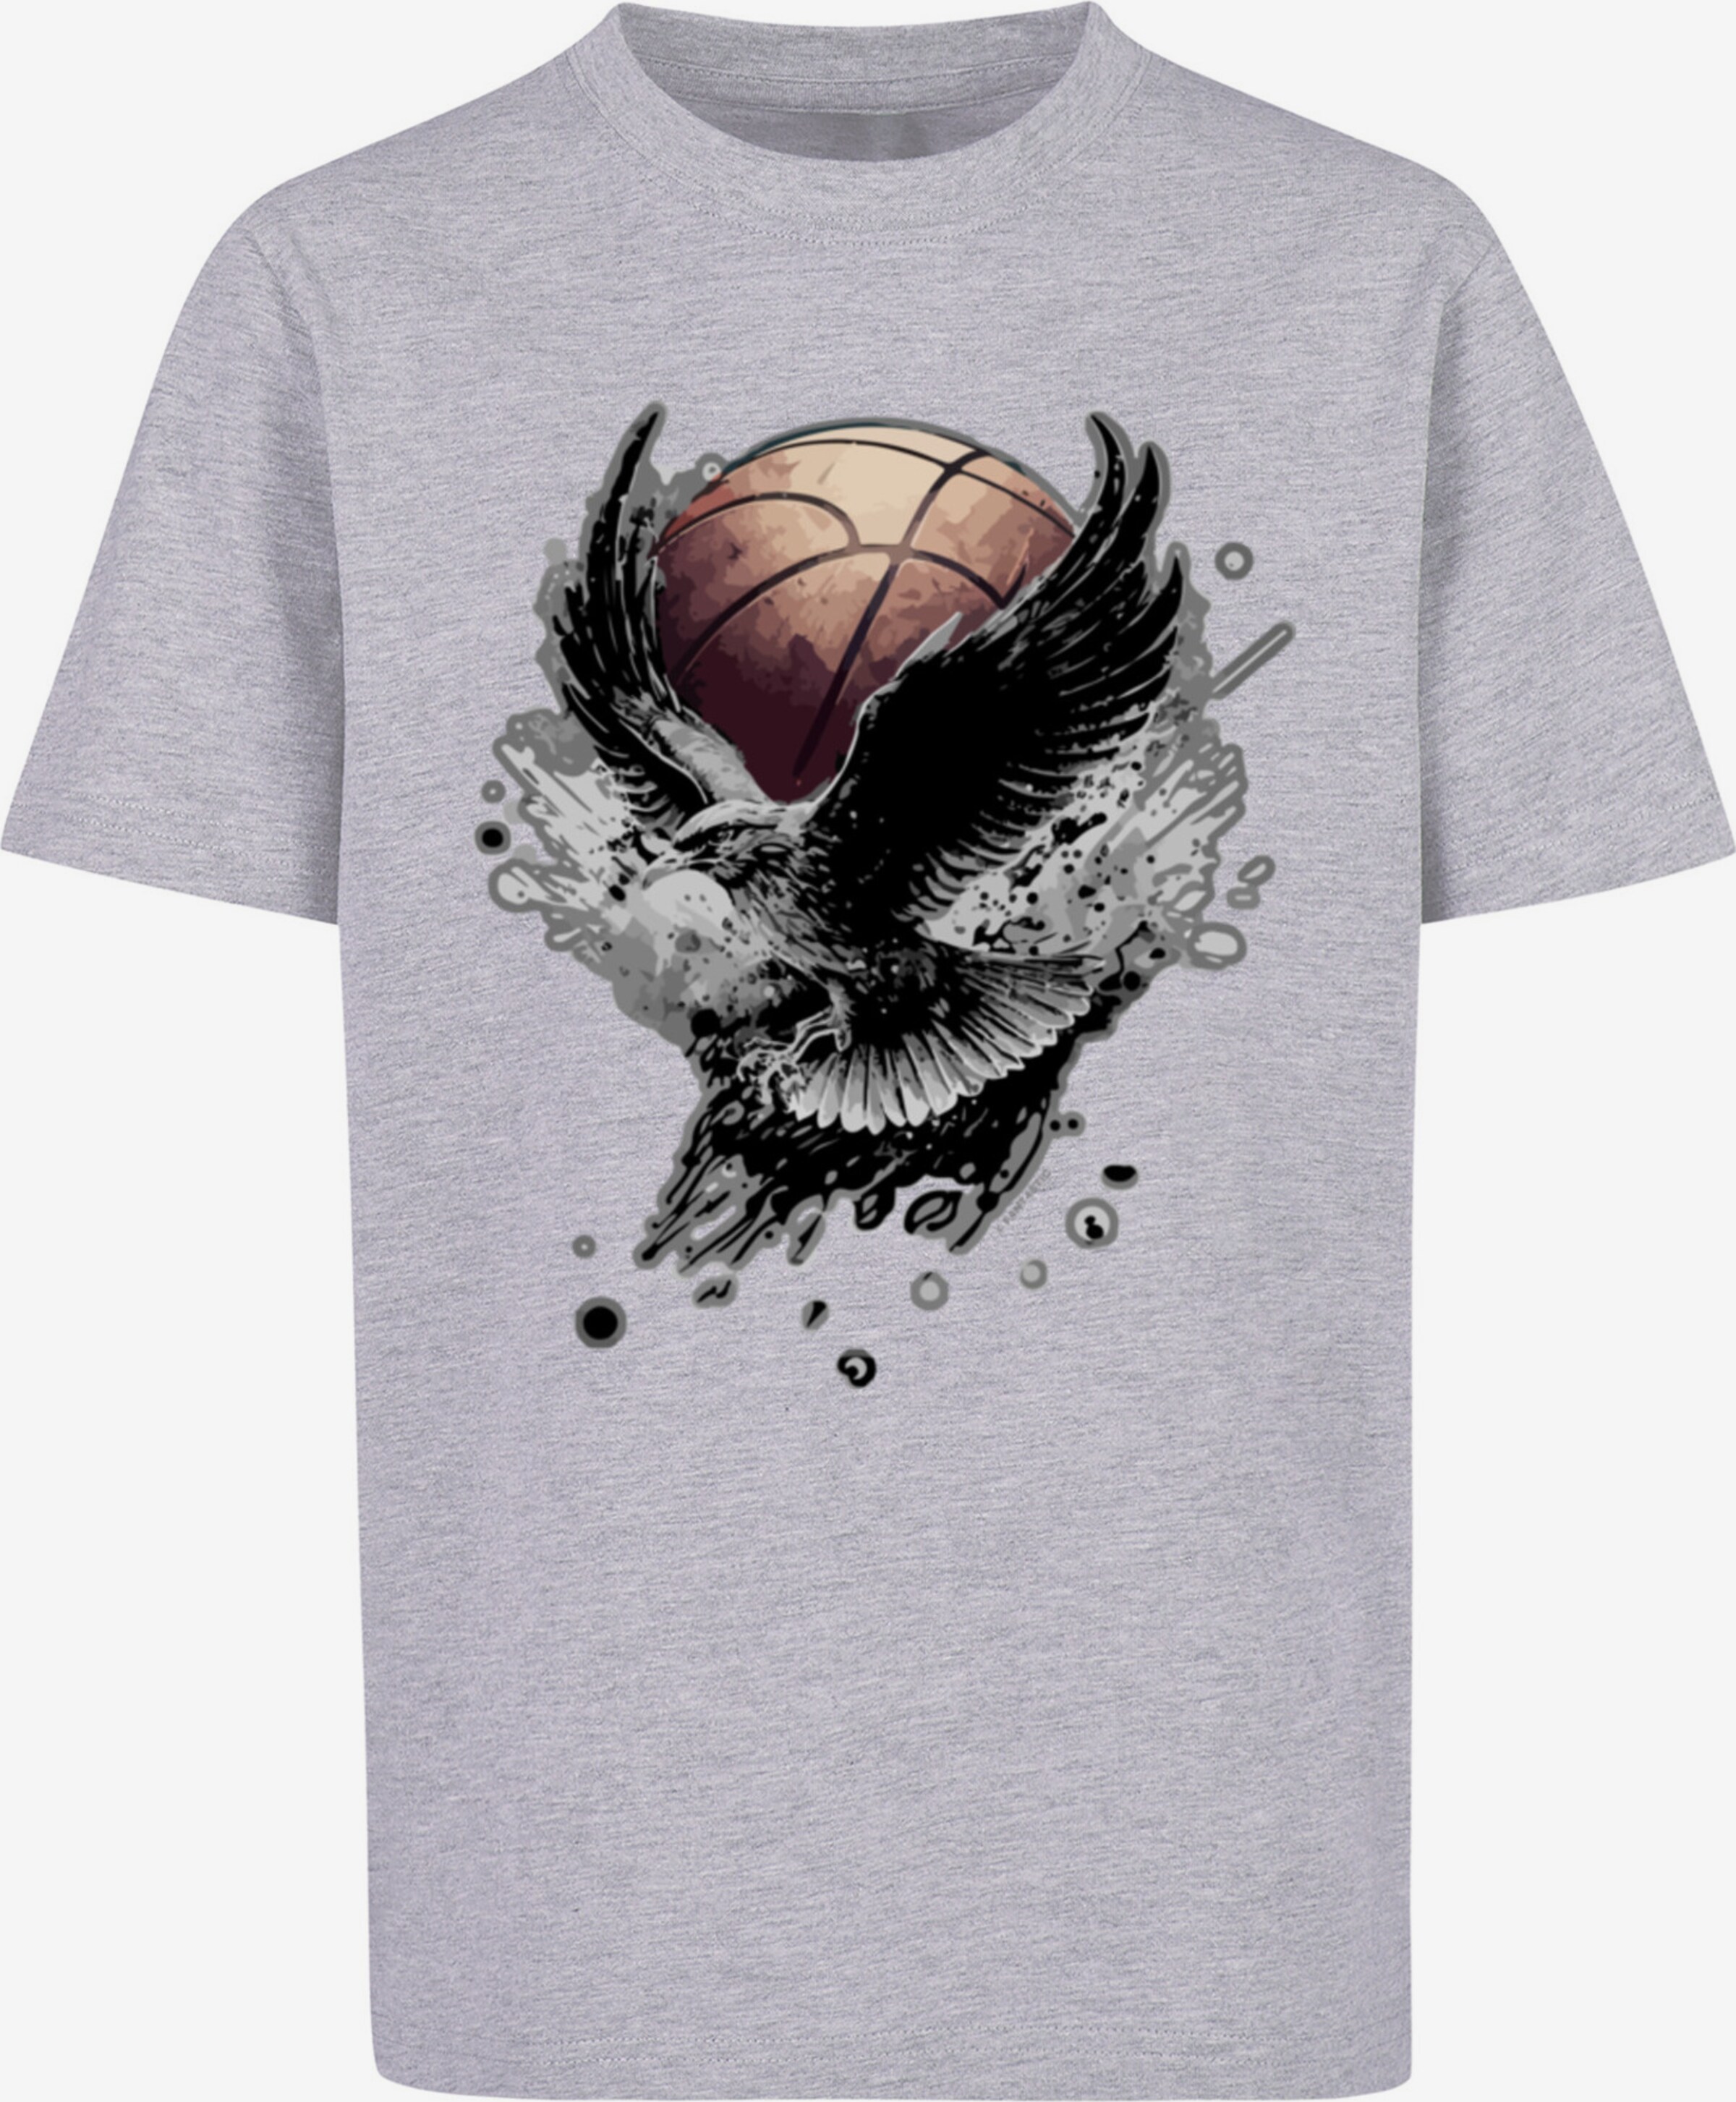 Shirt ABOUT Graumeliert \'Basketball in F4NT4STIC Adler\' | YOU